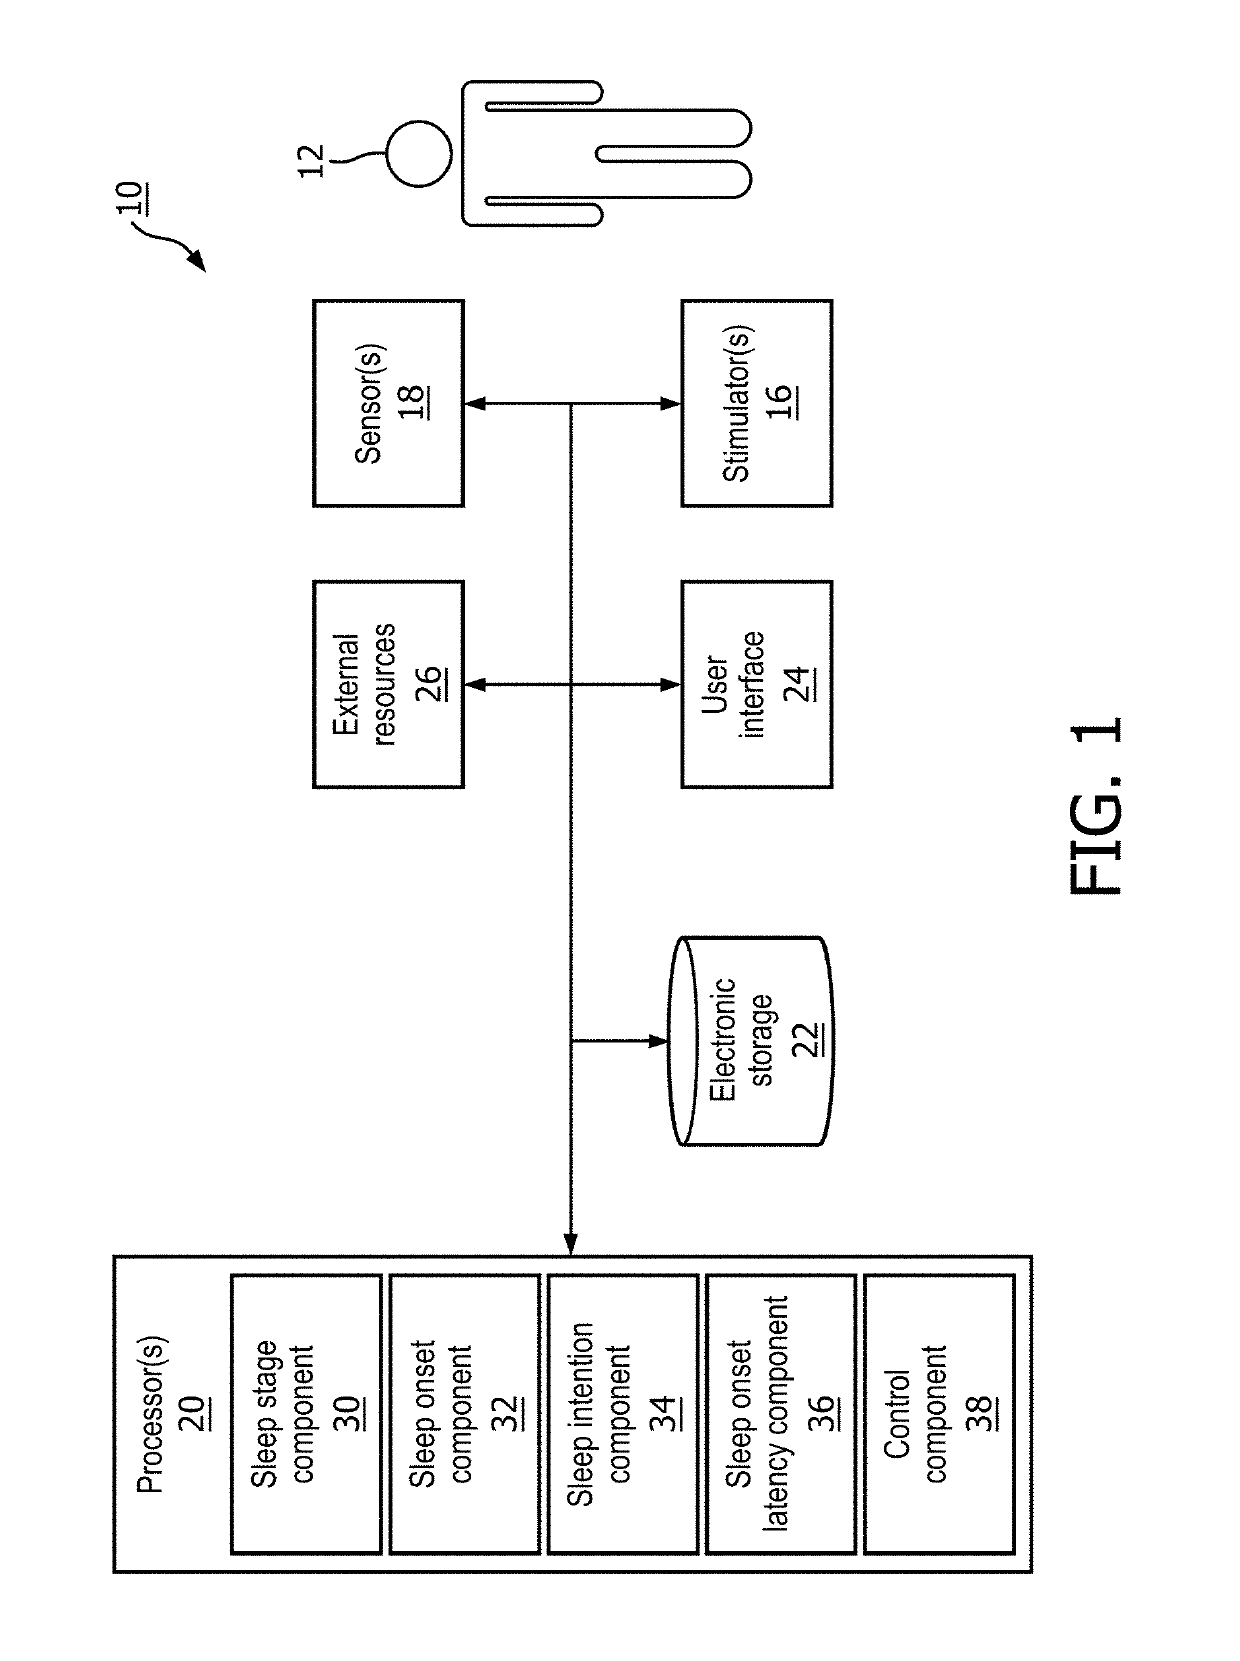 System and method for determining sleep onset latency